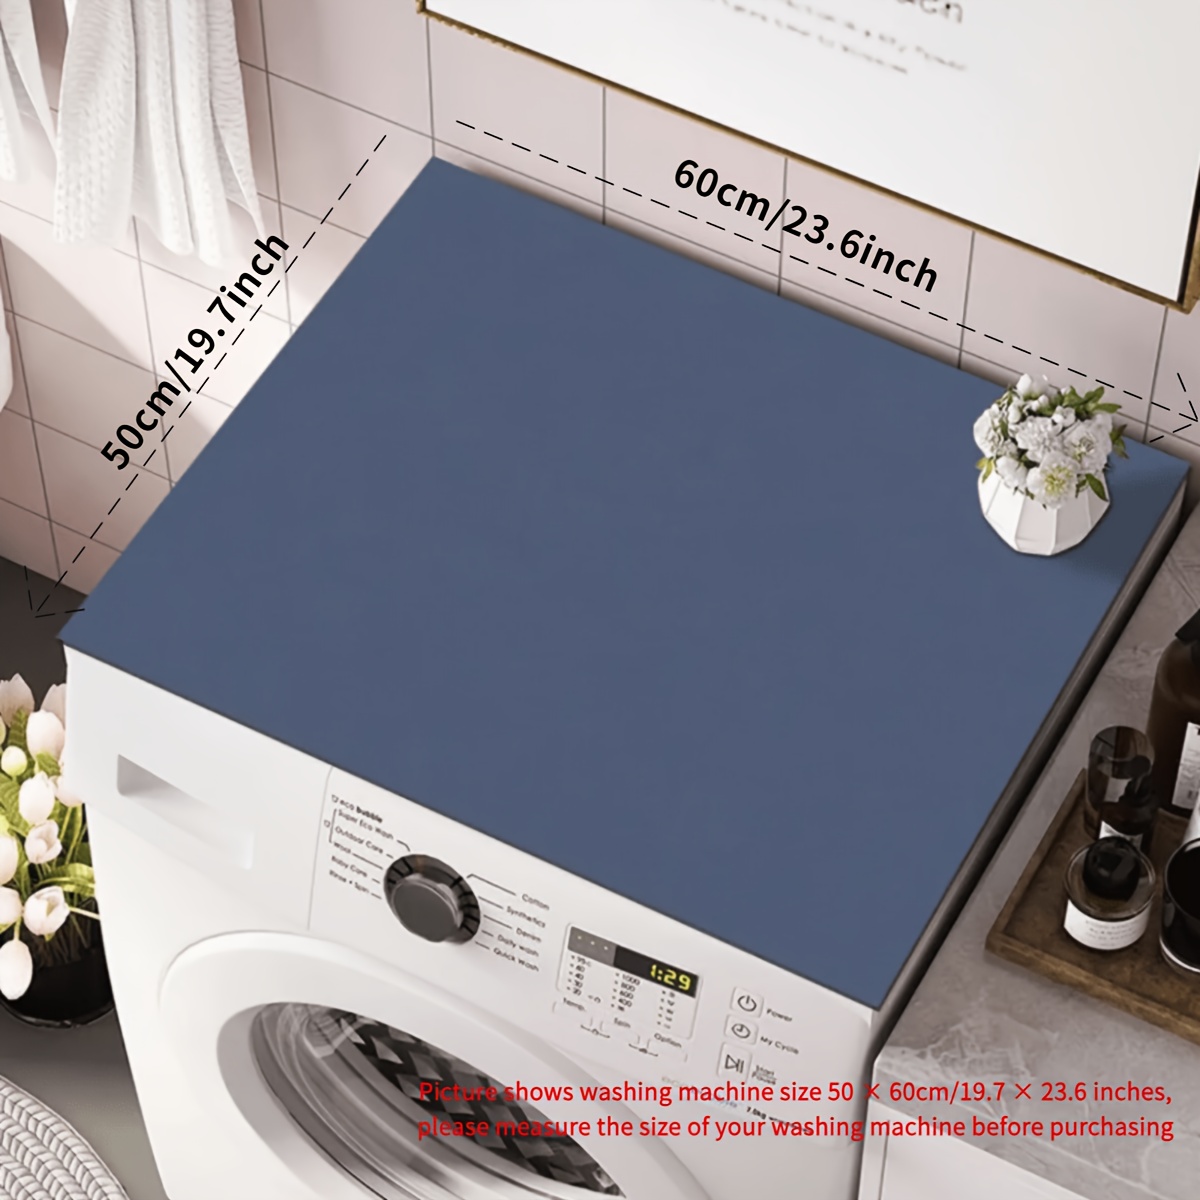 2 PCS Washer and Dryer Top Mat Cover, Non-slip Washer and Dryer Covers for  Top Protector, Dust-Proof Washing Machine Cover Washer Dryer Top Covers for